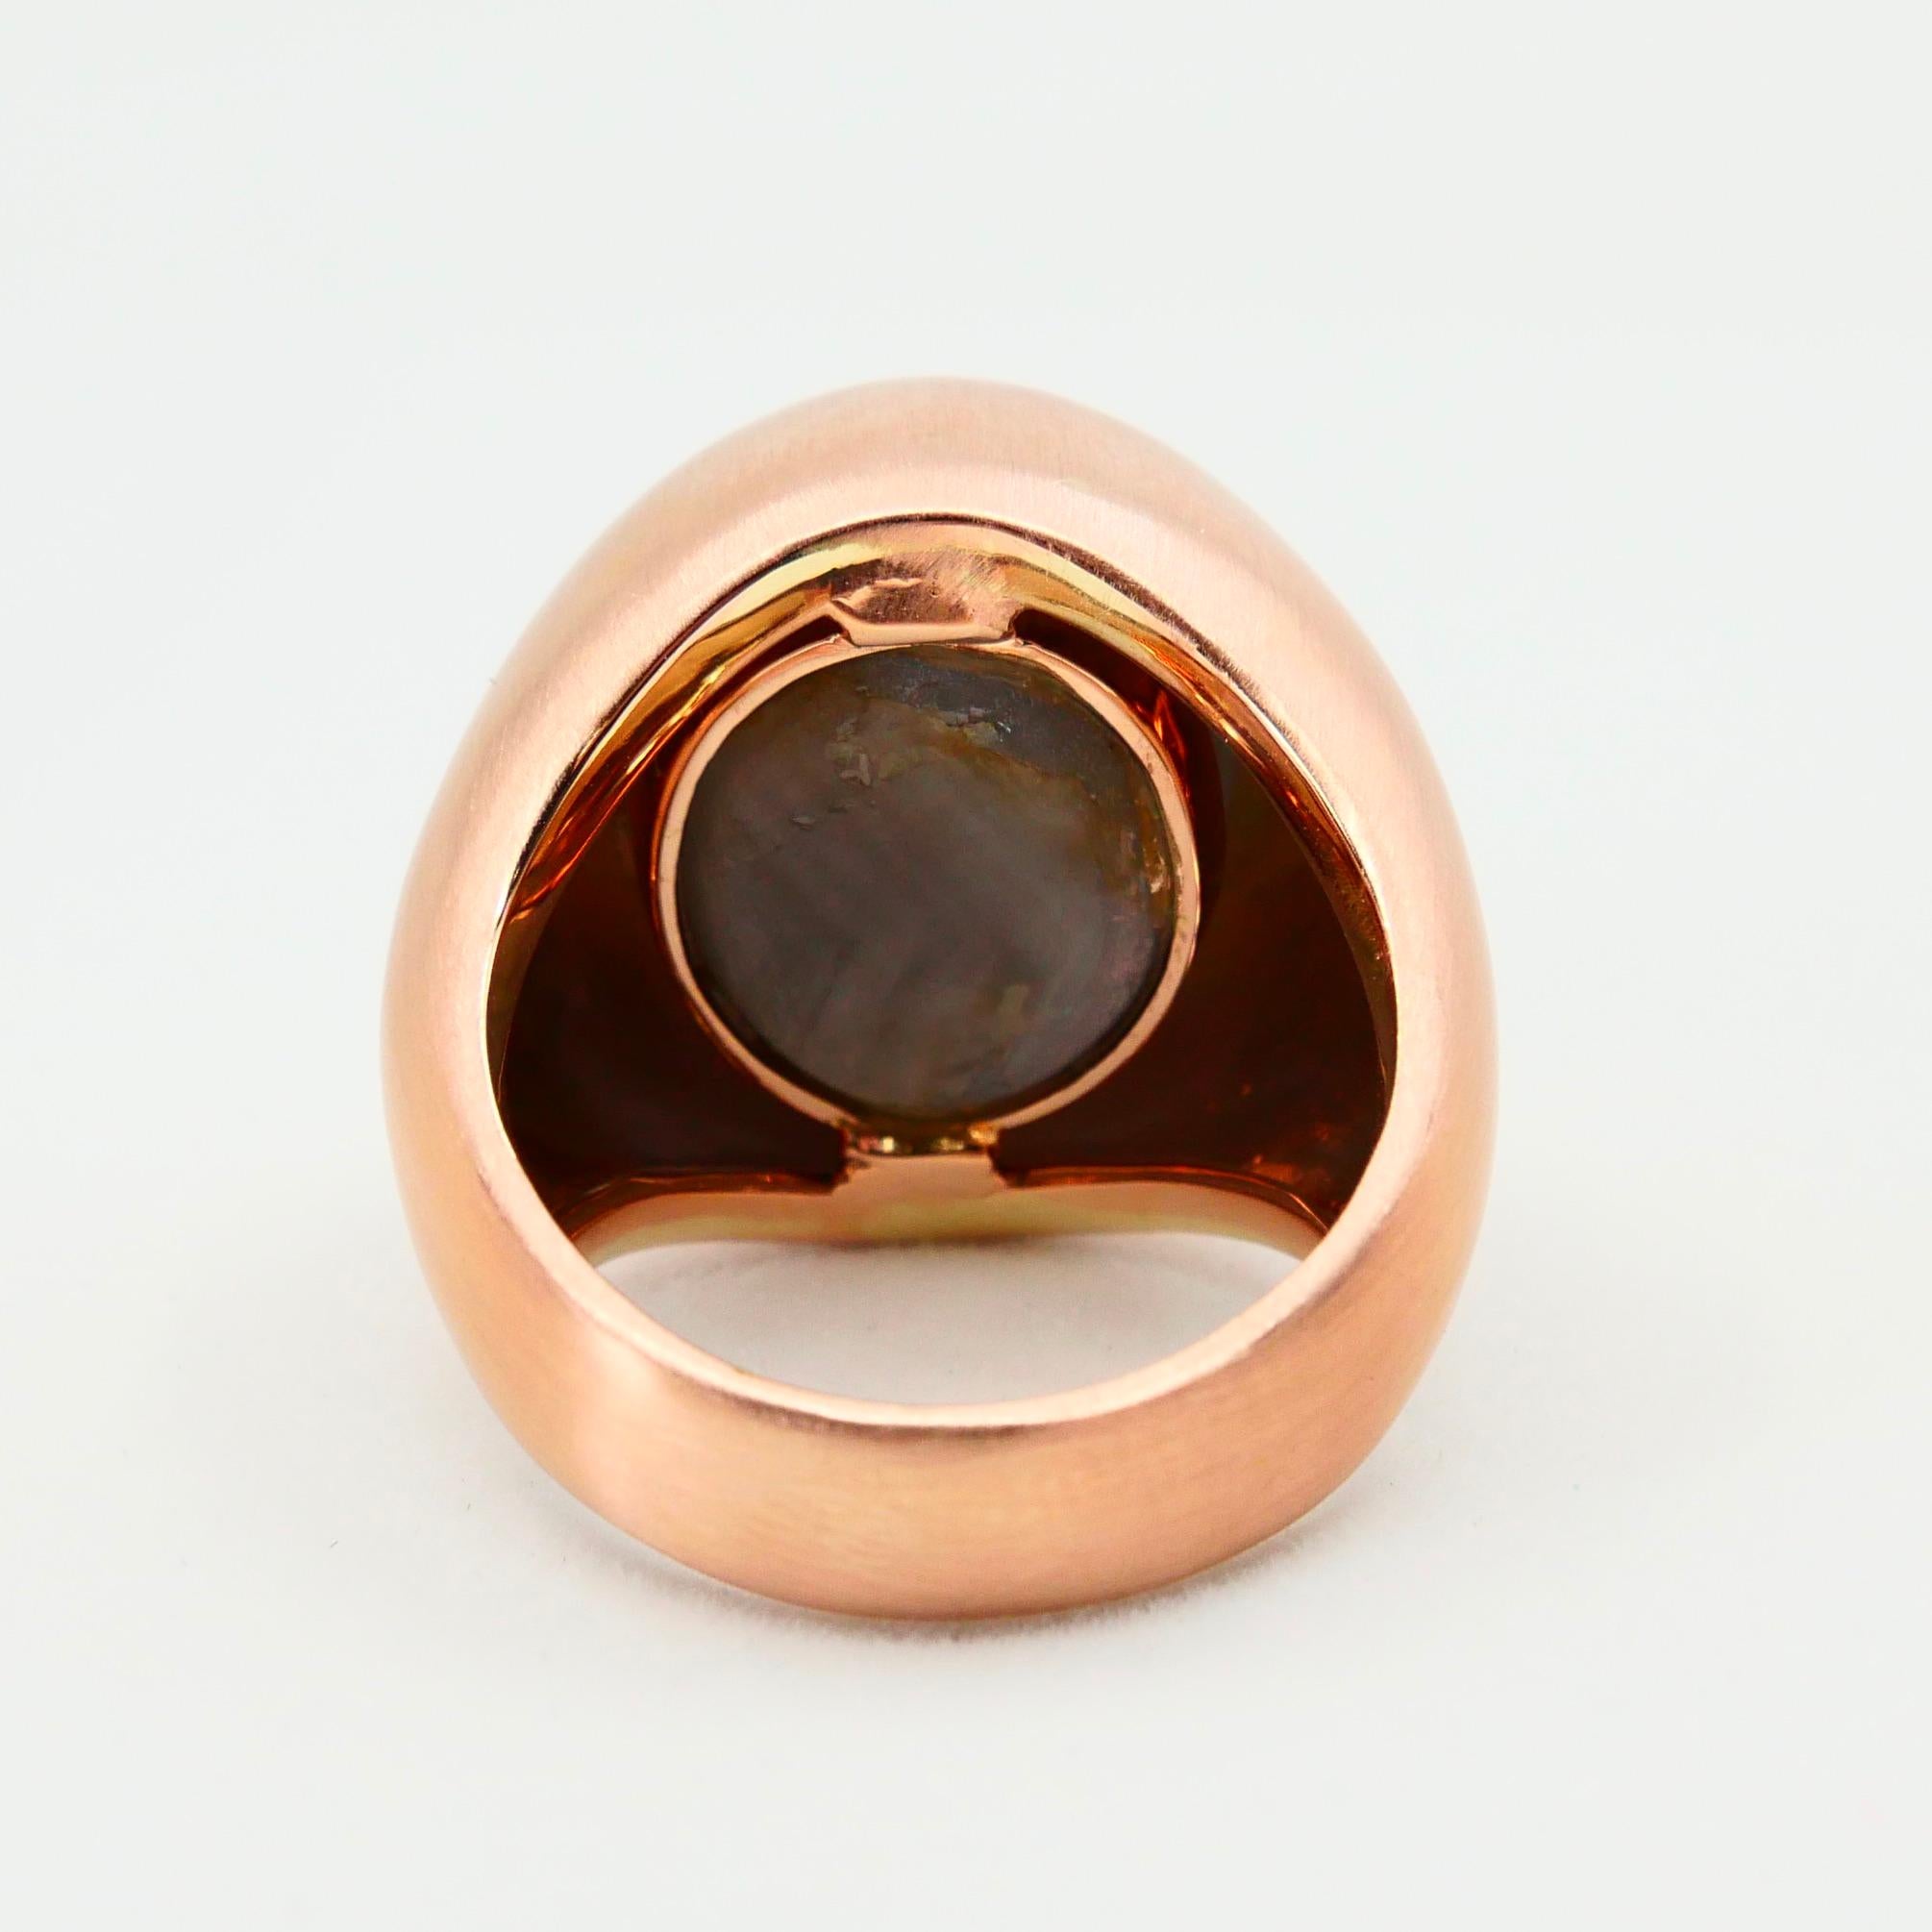 Certified Blue Star Sapphire 39.28 Carat Rose Gold Ring, Unisex, Strong Star 7